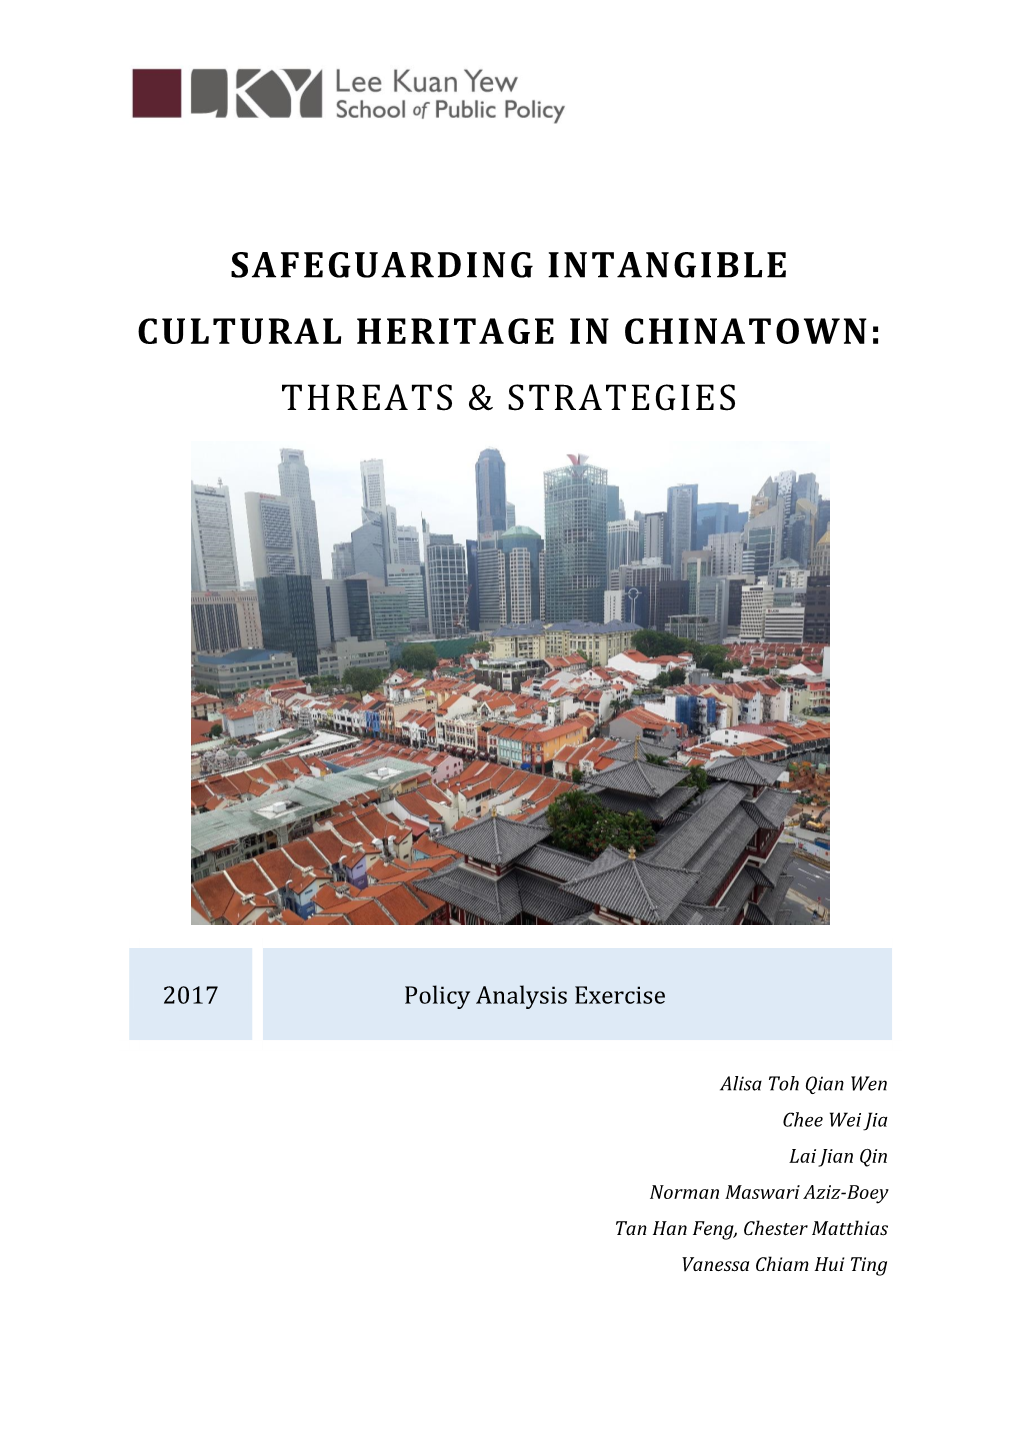 Safeguarding Intangible Cultural Heritage in Chinatown: Threats & Strategies